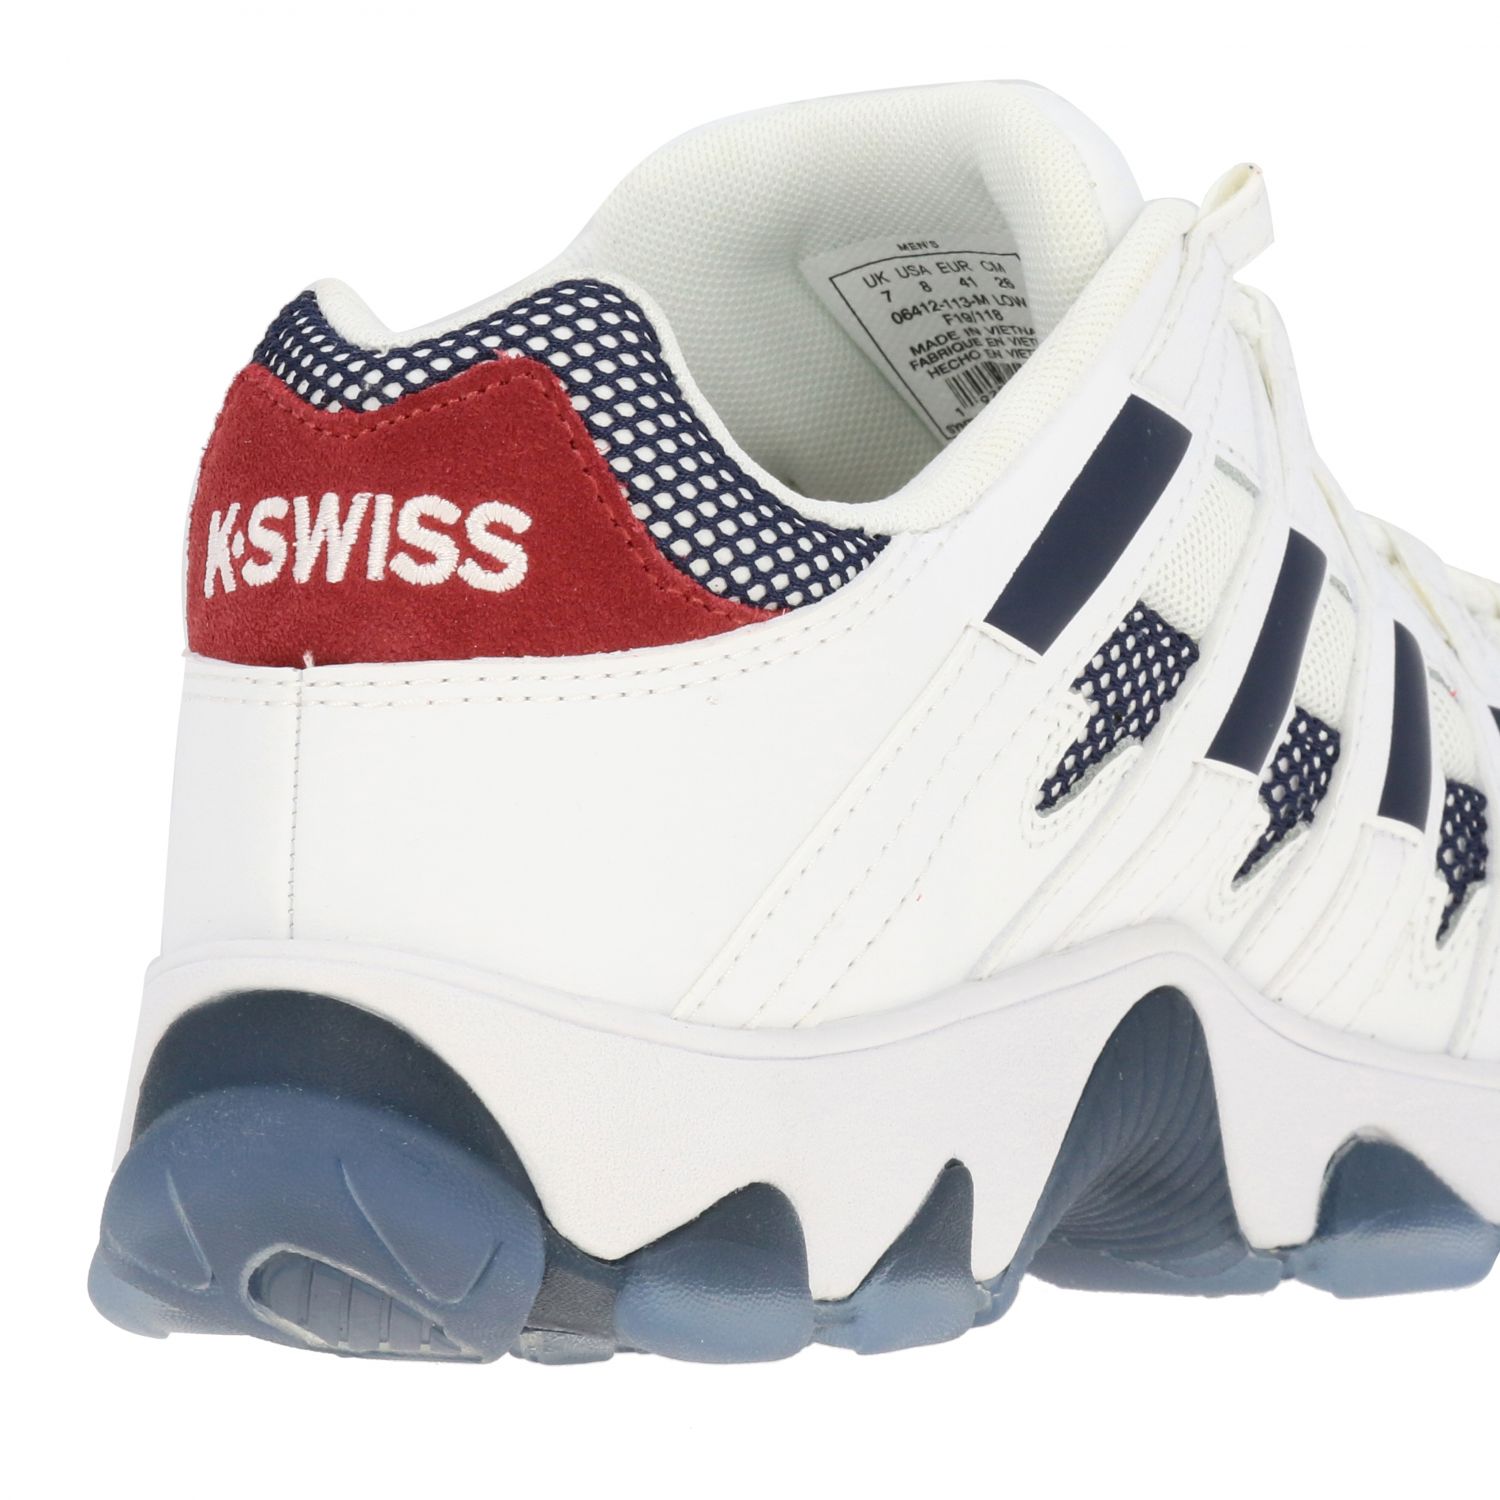 all k swiss shoes ever made